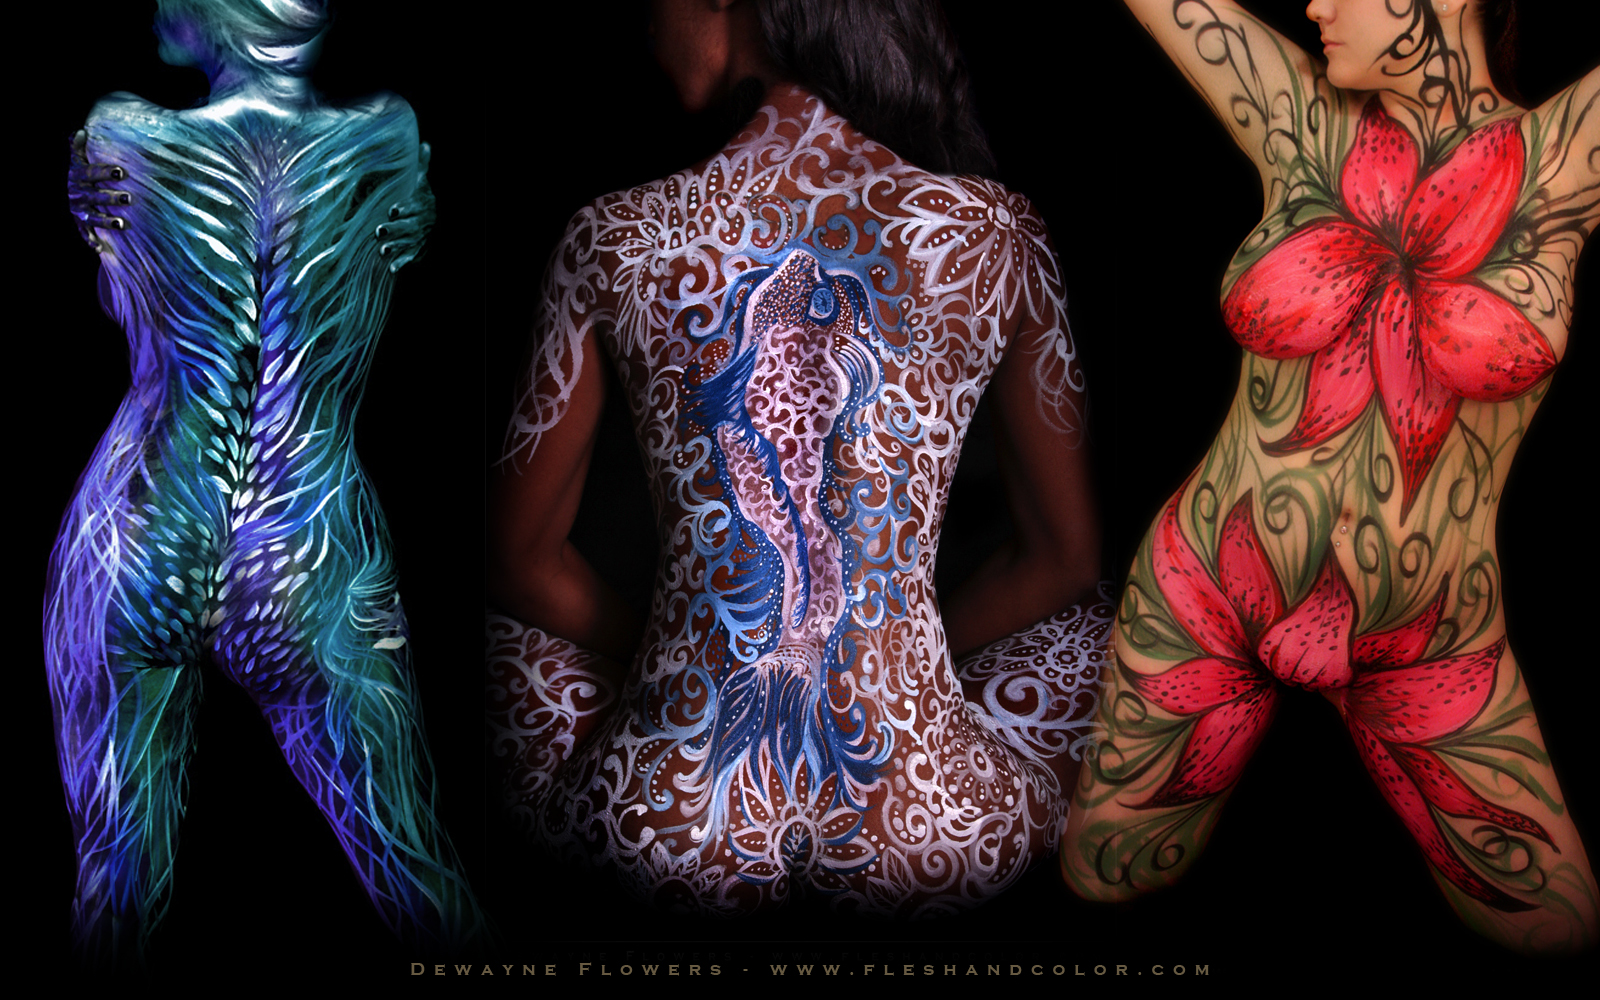 Live Bodypainting in Los Angeles, CA